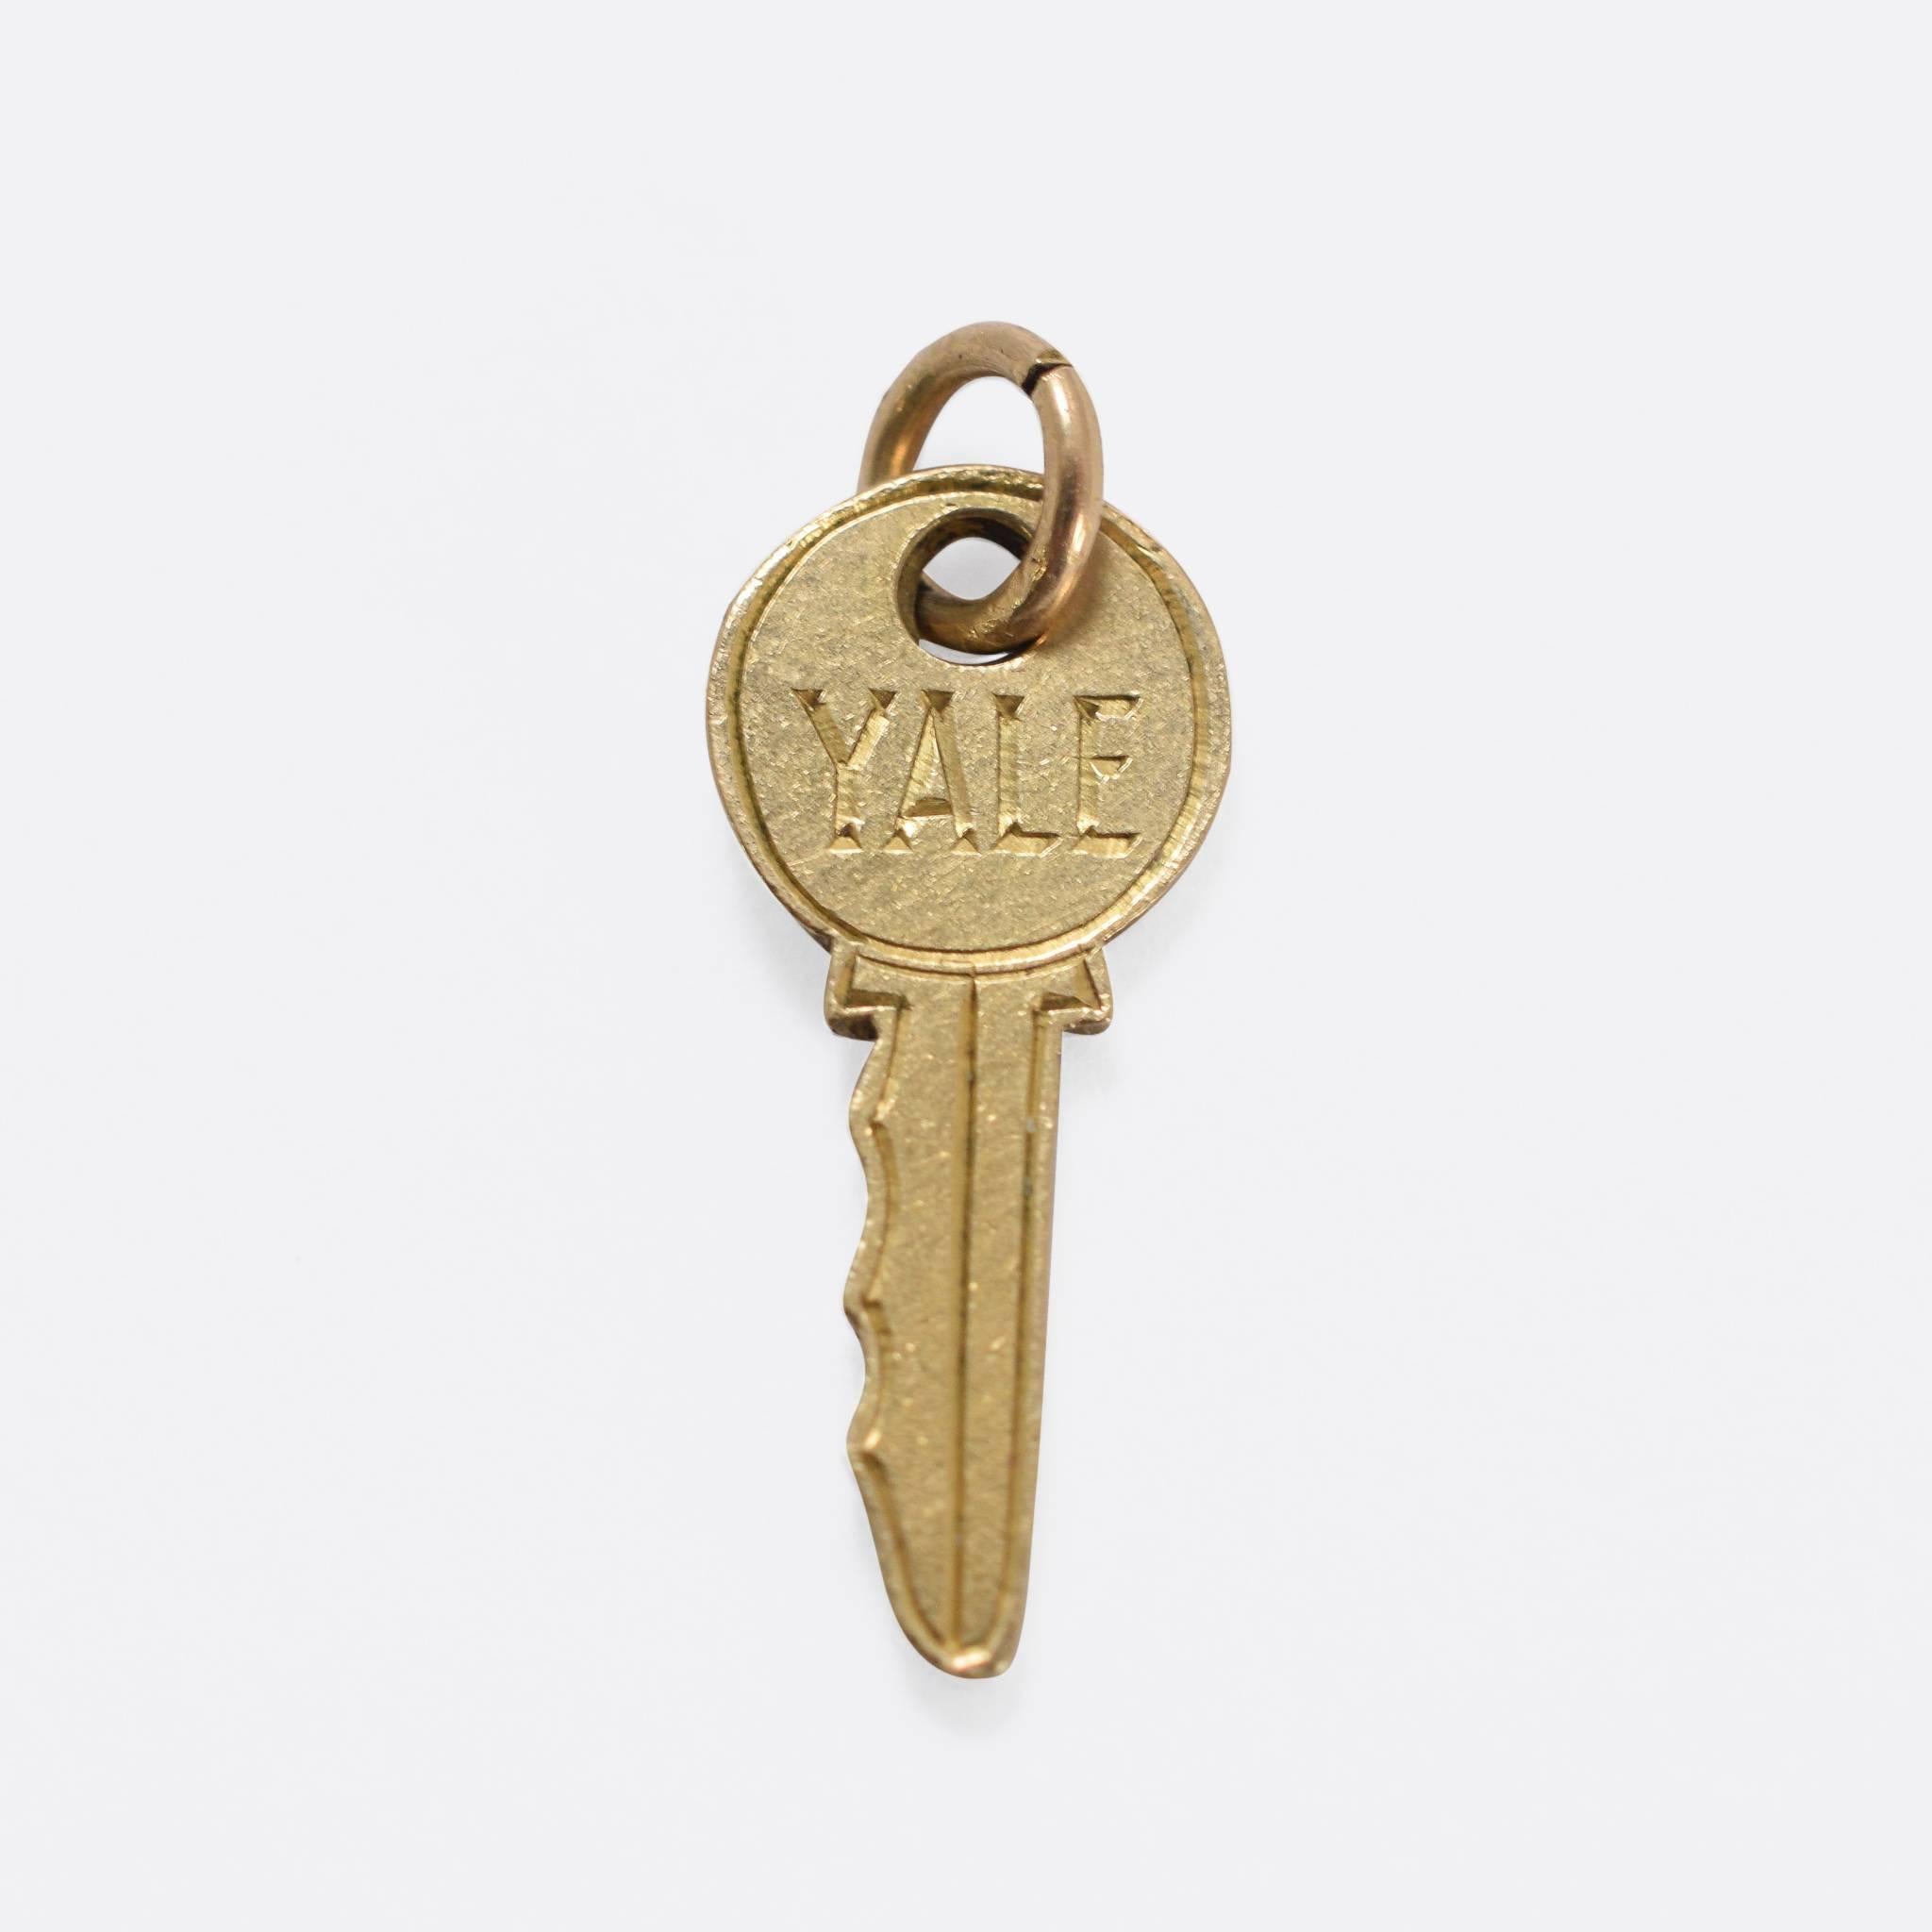 This little gold pendant dates to the middle of the 20th century, and, rather quaintly, is modelled as a Yale key - following on the long-standing 